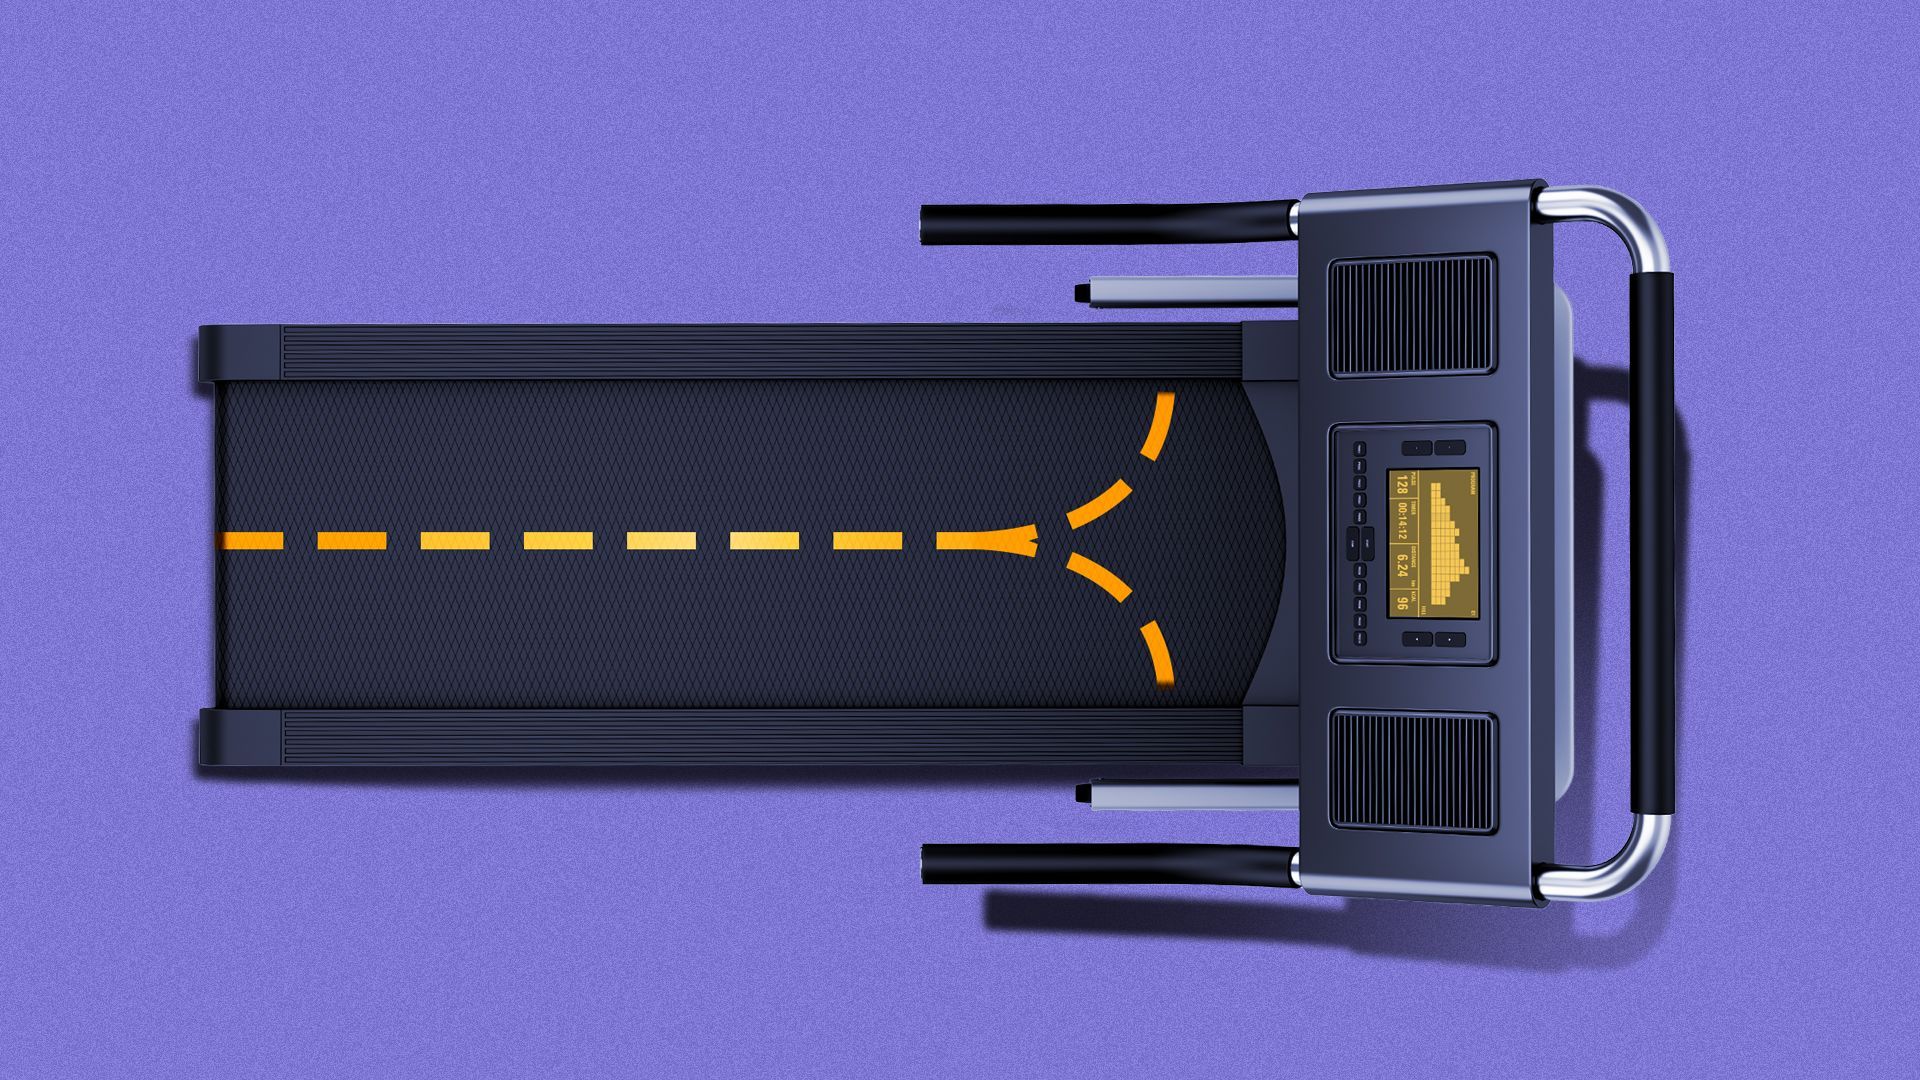 Illustration of a treadmill with a forked yellow road line in the middle